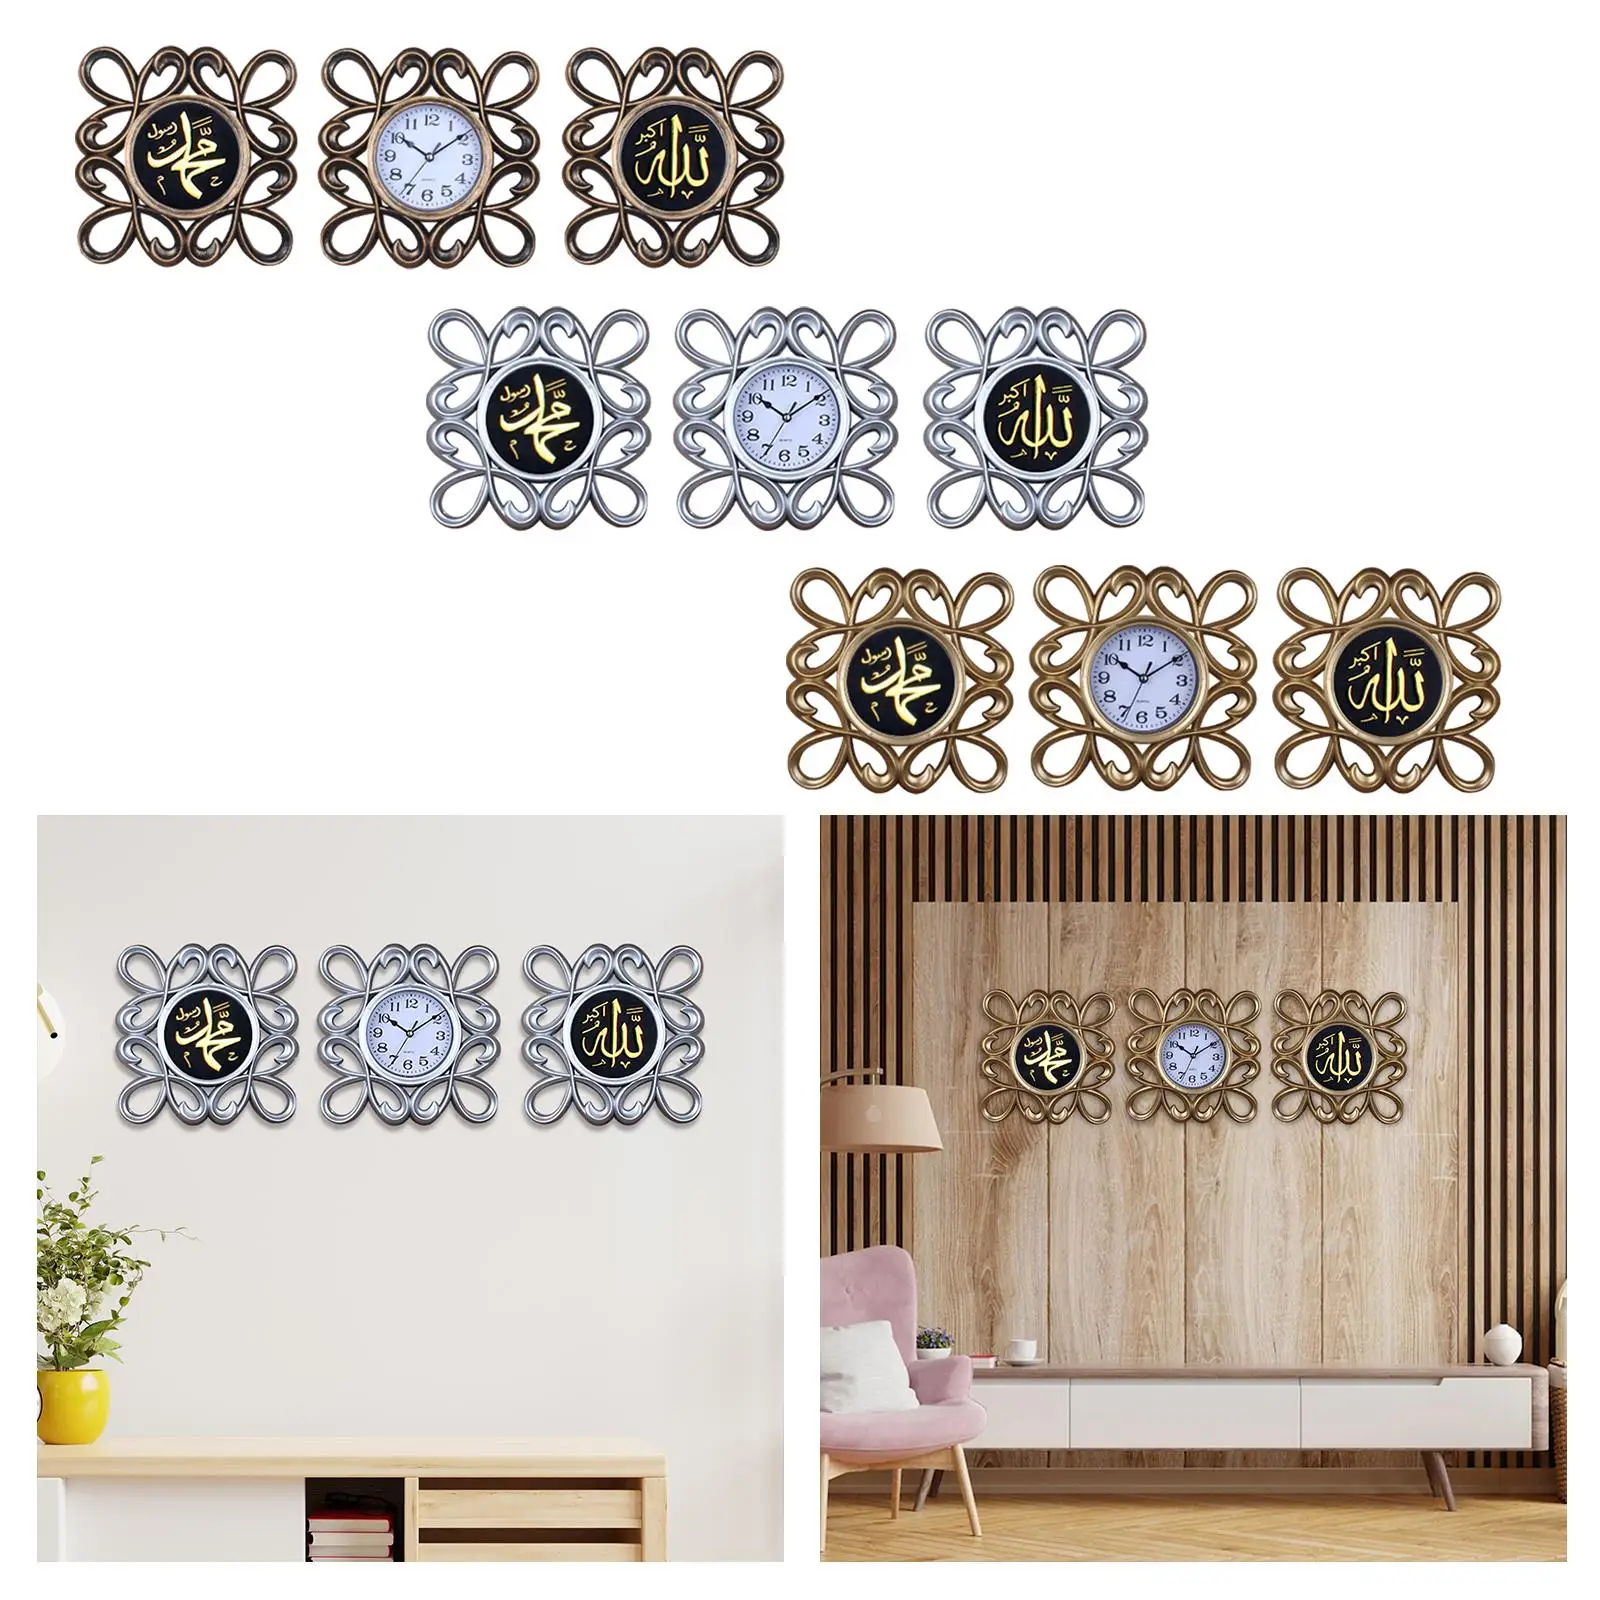 3 Pieces Islamic Decor Wall Hanging Clock Decorative Clock Plastic and Glass for Housewarming Gift Multifunctional Lightweight